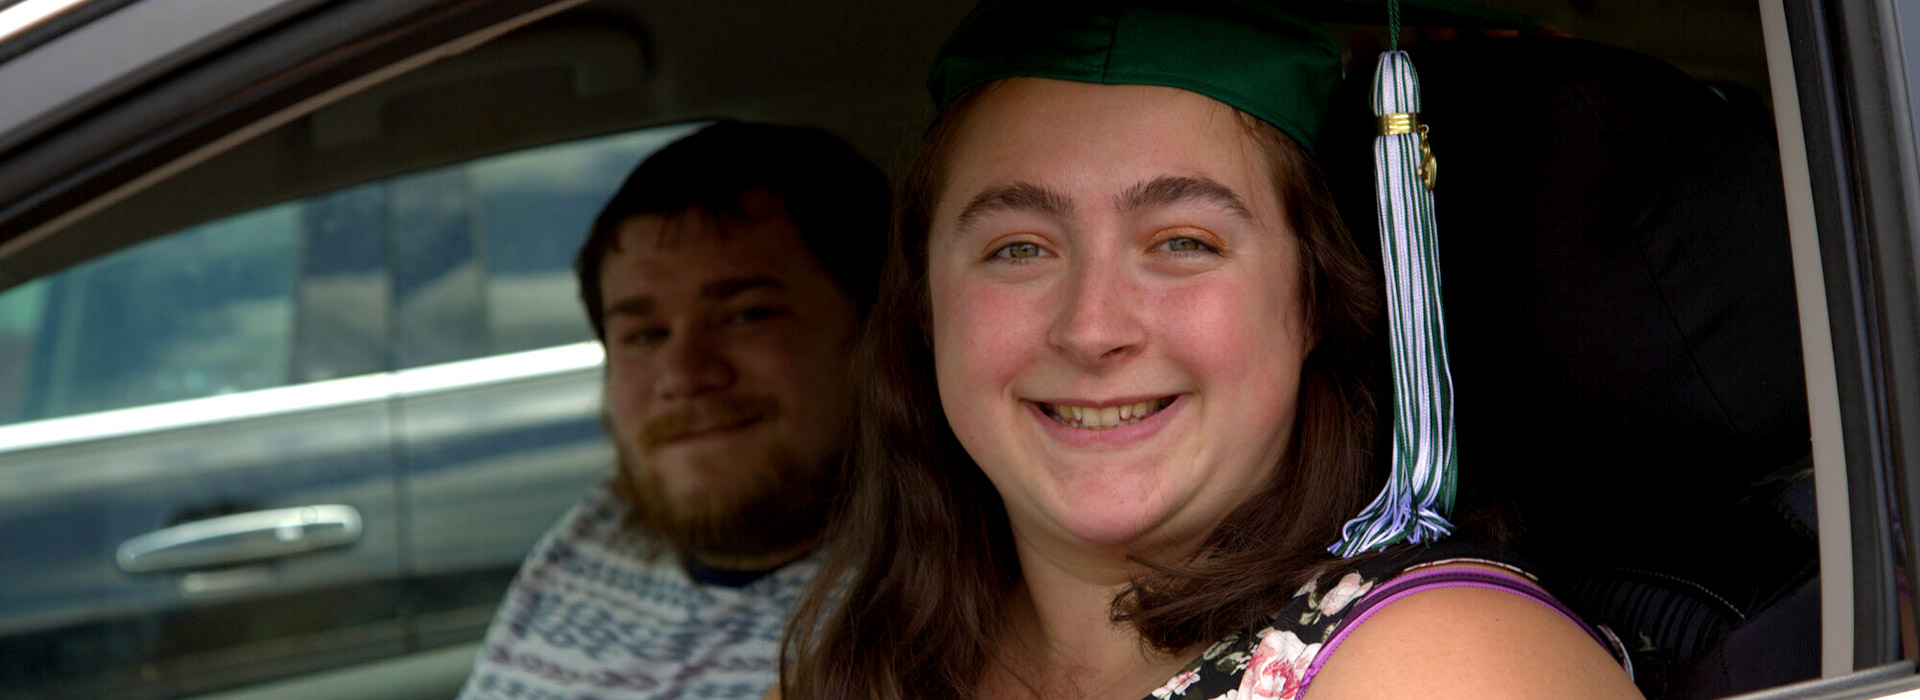 A graduate and guest attend the Norwich Campus's 2020 Drive-Thru Commencement from their vehicle